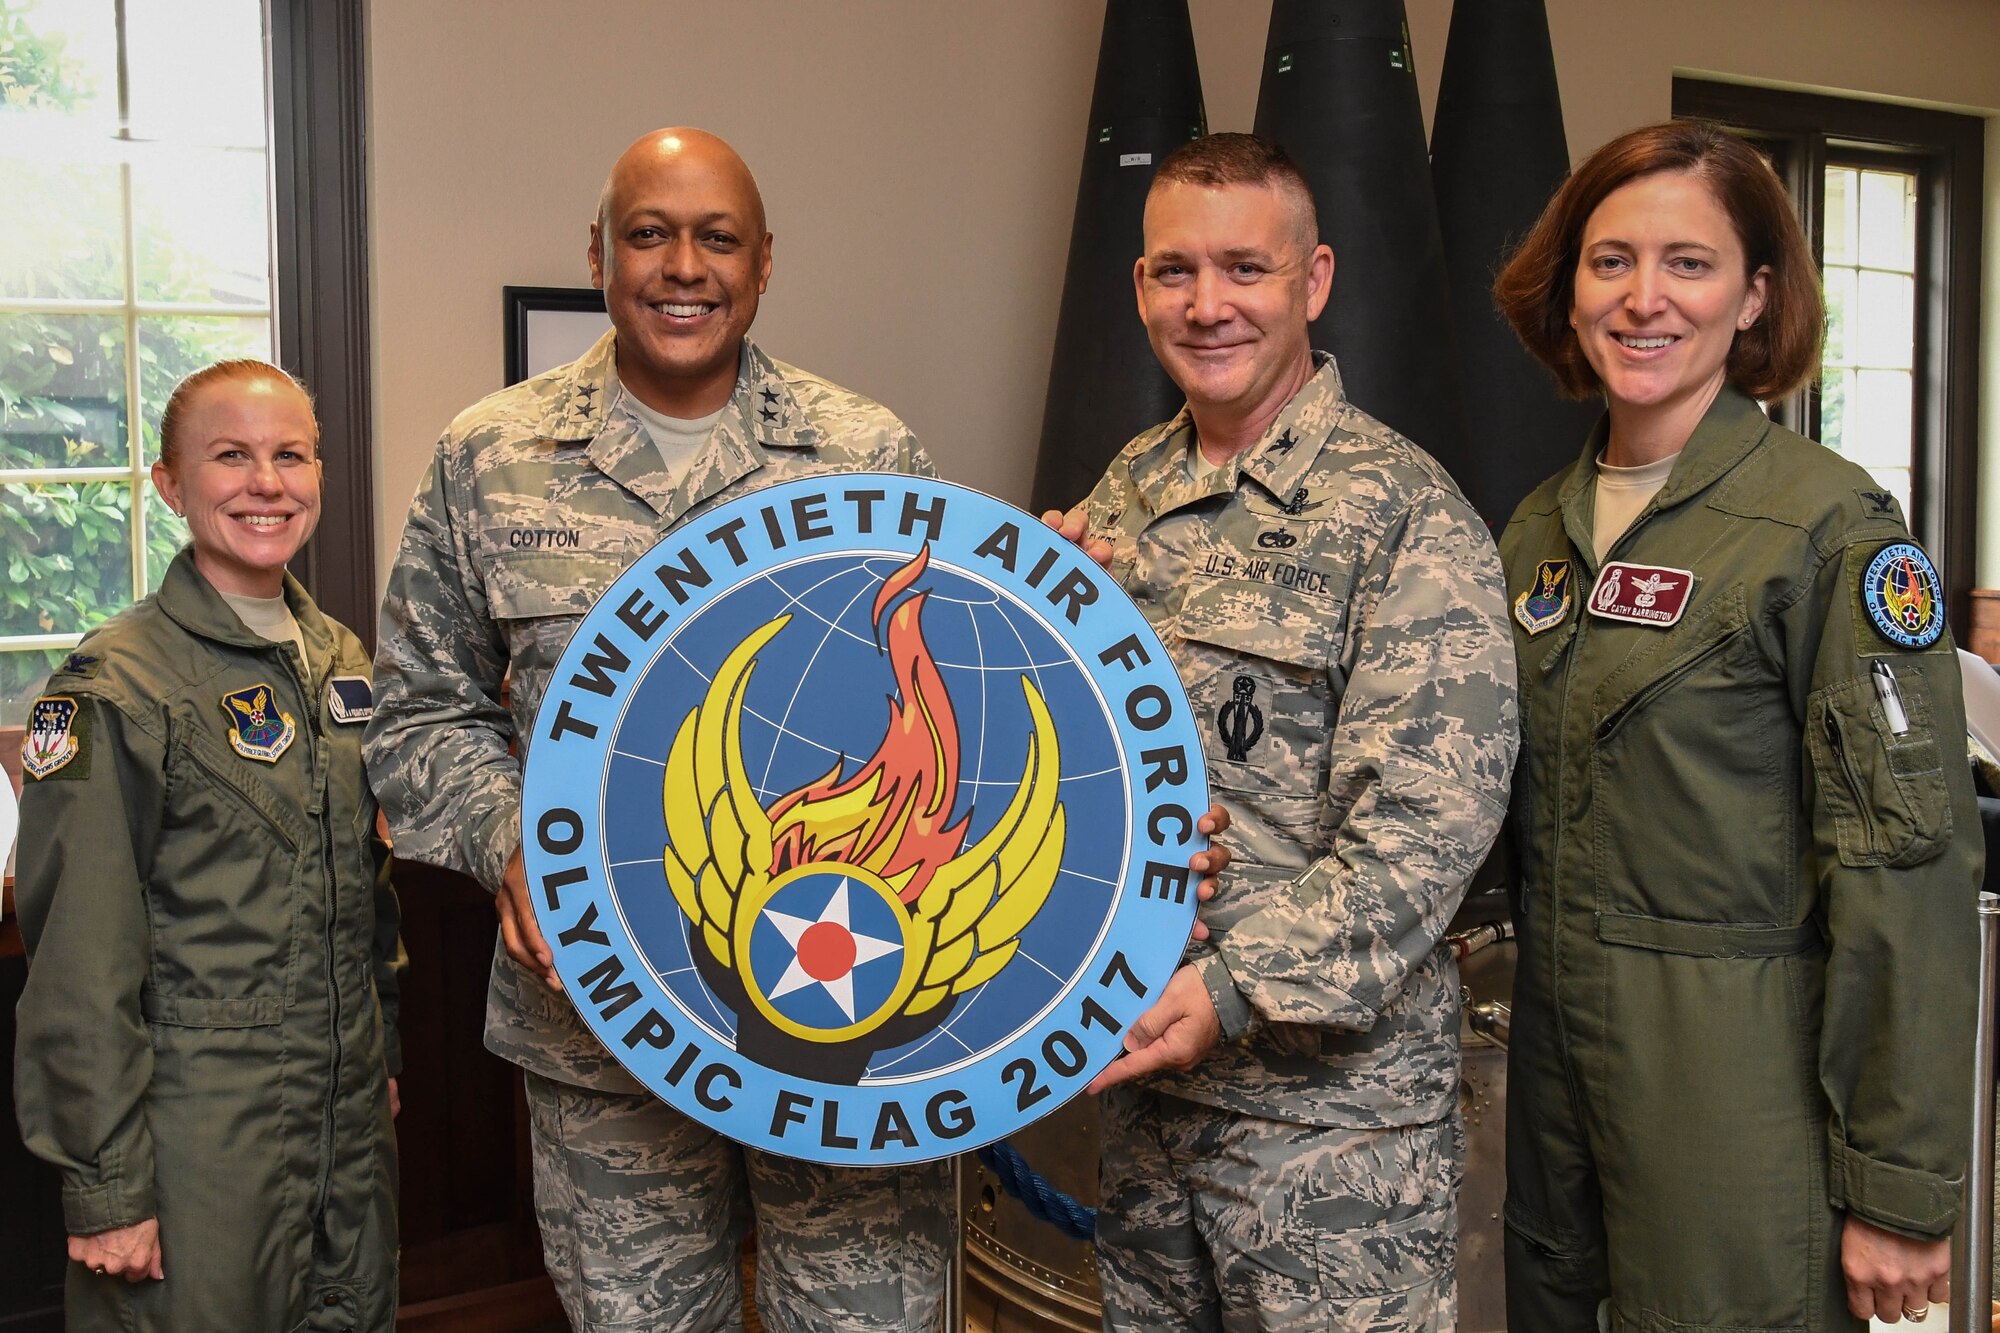 The 20th Air Force will hold its first week-long, Olympic Flag exercise at F. E. Warren Air Force Base, Wyoming, to bring ICBM operators from the three missile wings together to demonstrate their expertise and to collect best practices across the ICBM force.